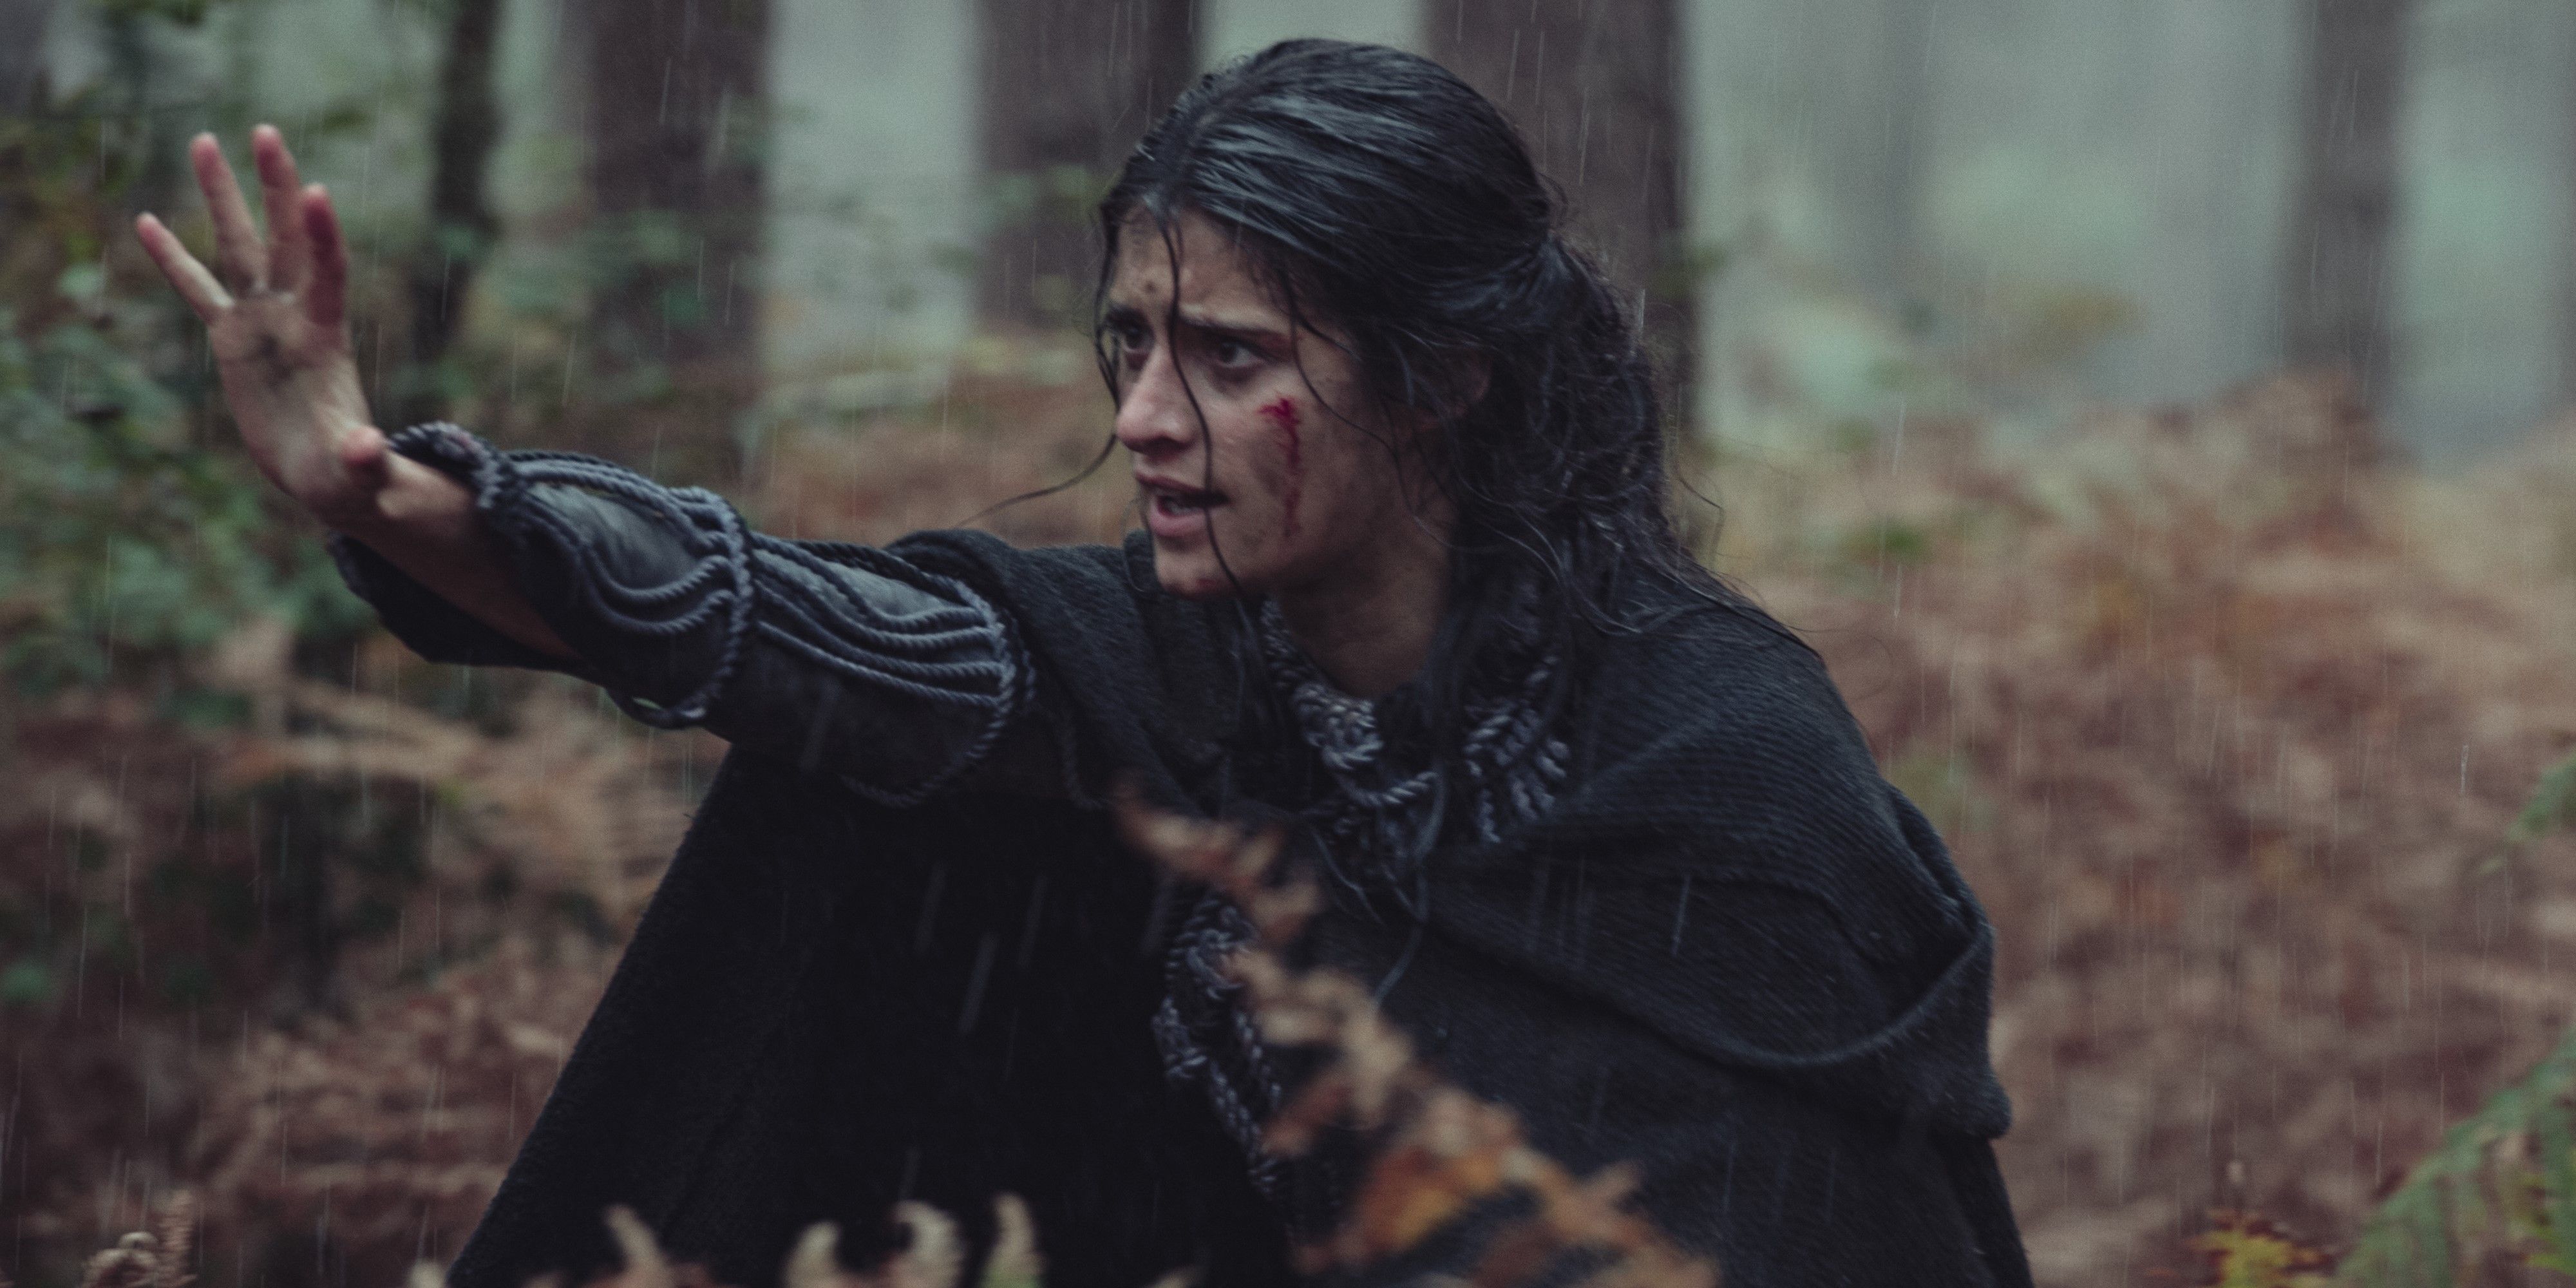 Yennefer defending herself in a rainy forest in The Witcher